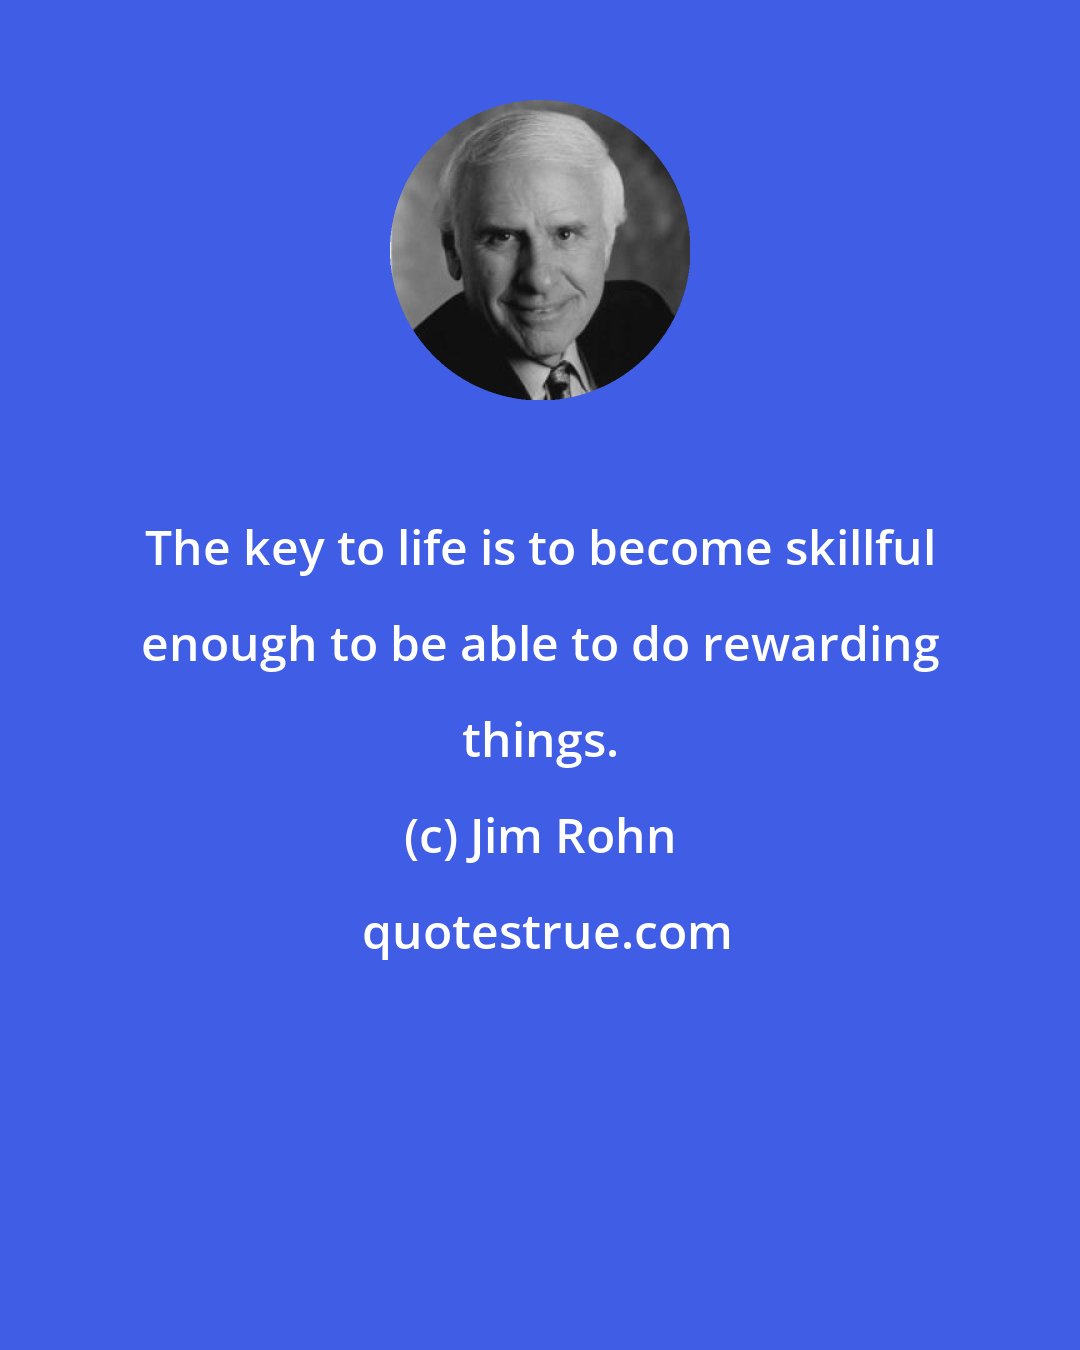 Jim Rohn: The key to life is to become skillful enough to be able to do rewarding things.